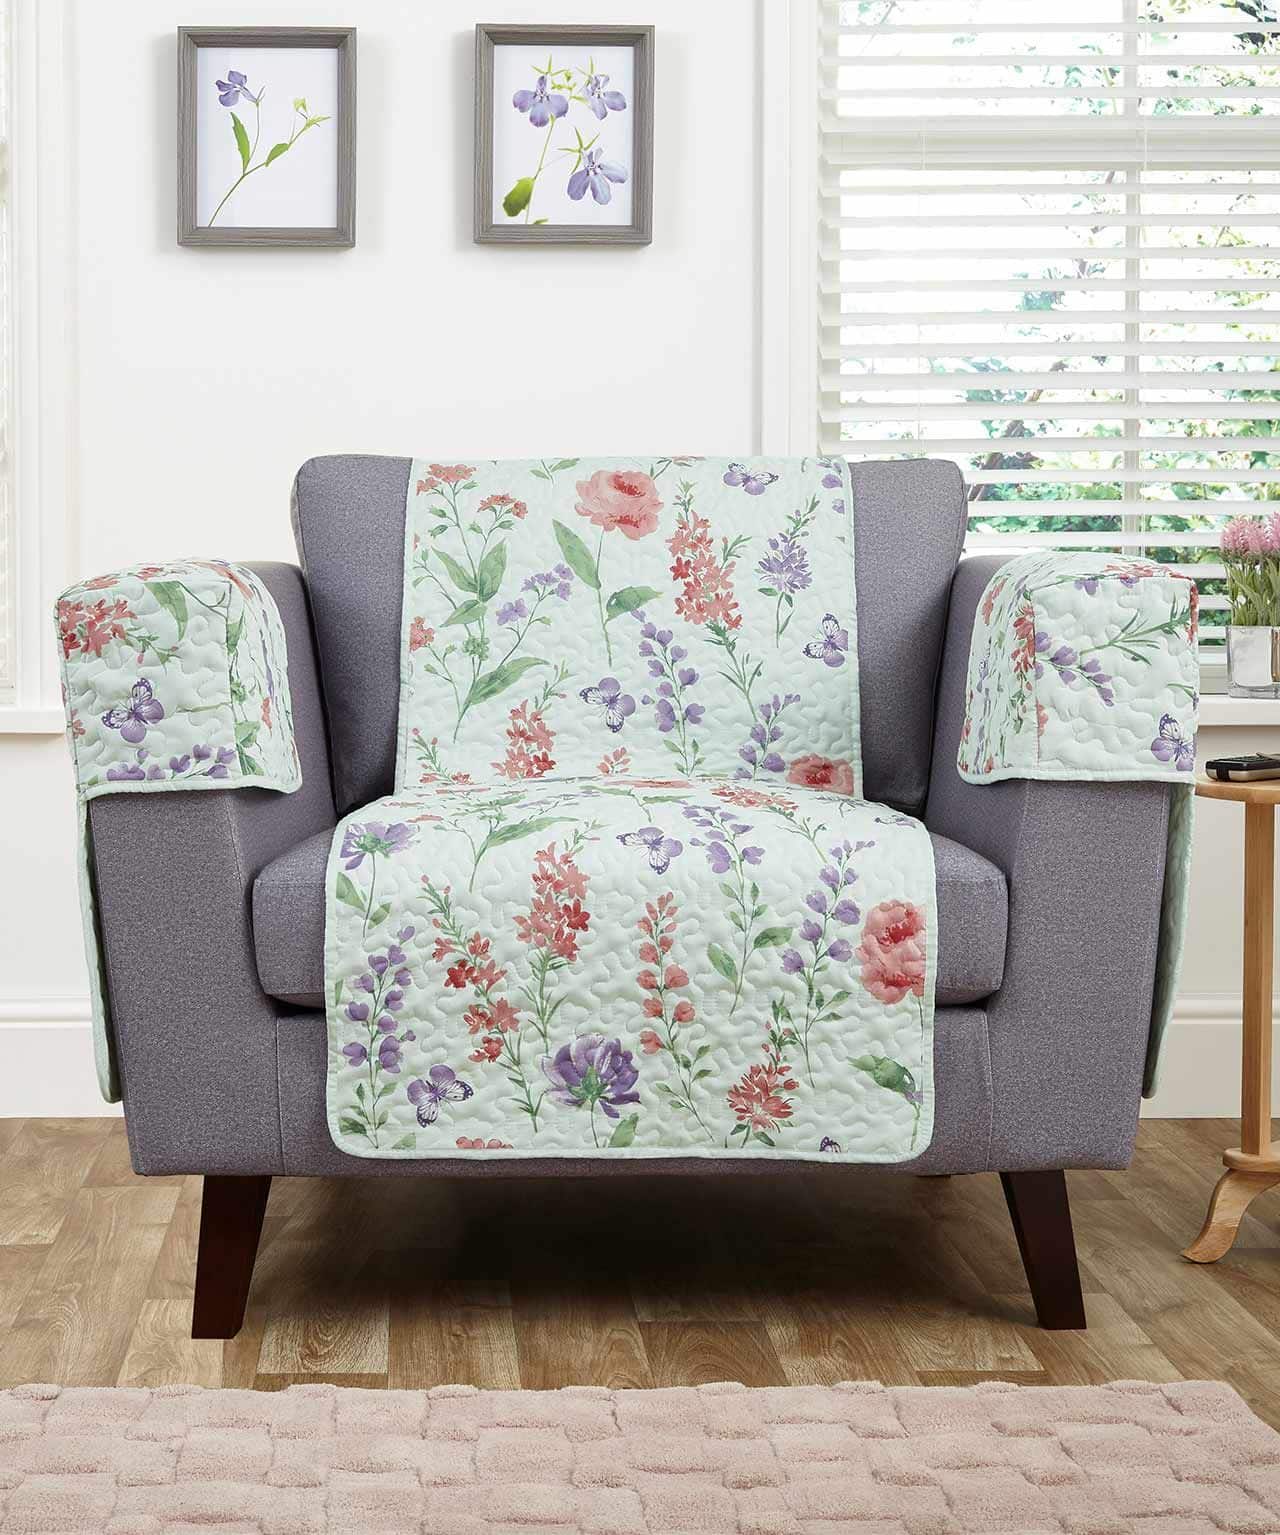 How to maintain and clean floral sofas